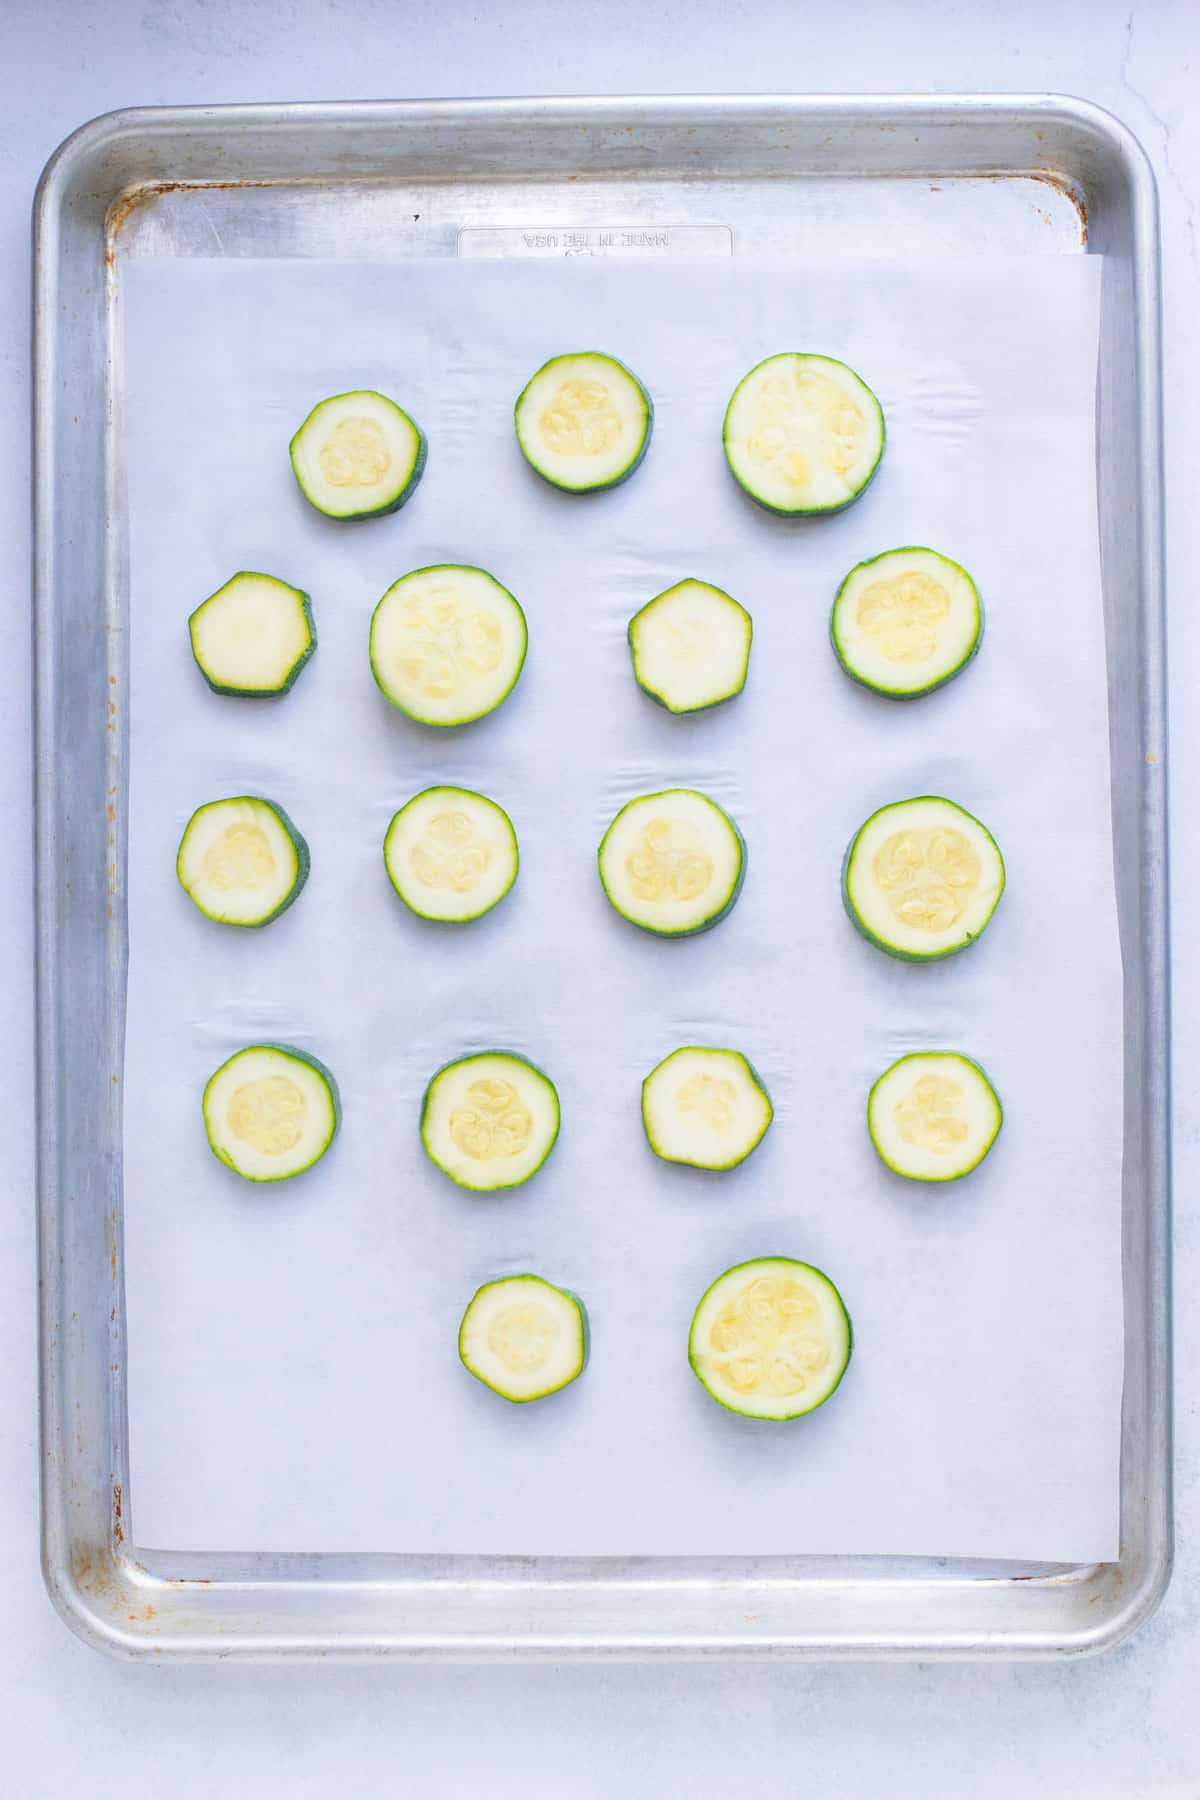 Instructional pictures for preparing zucchini to be frozen by putting them on a large baking sheet.